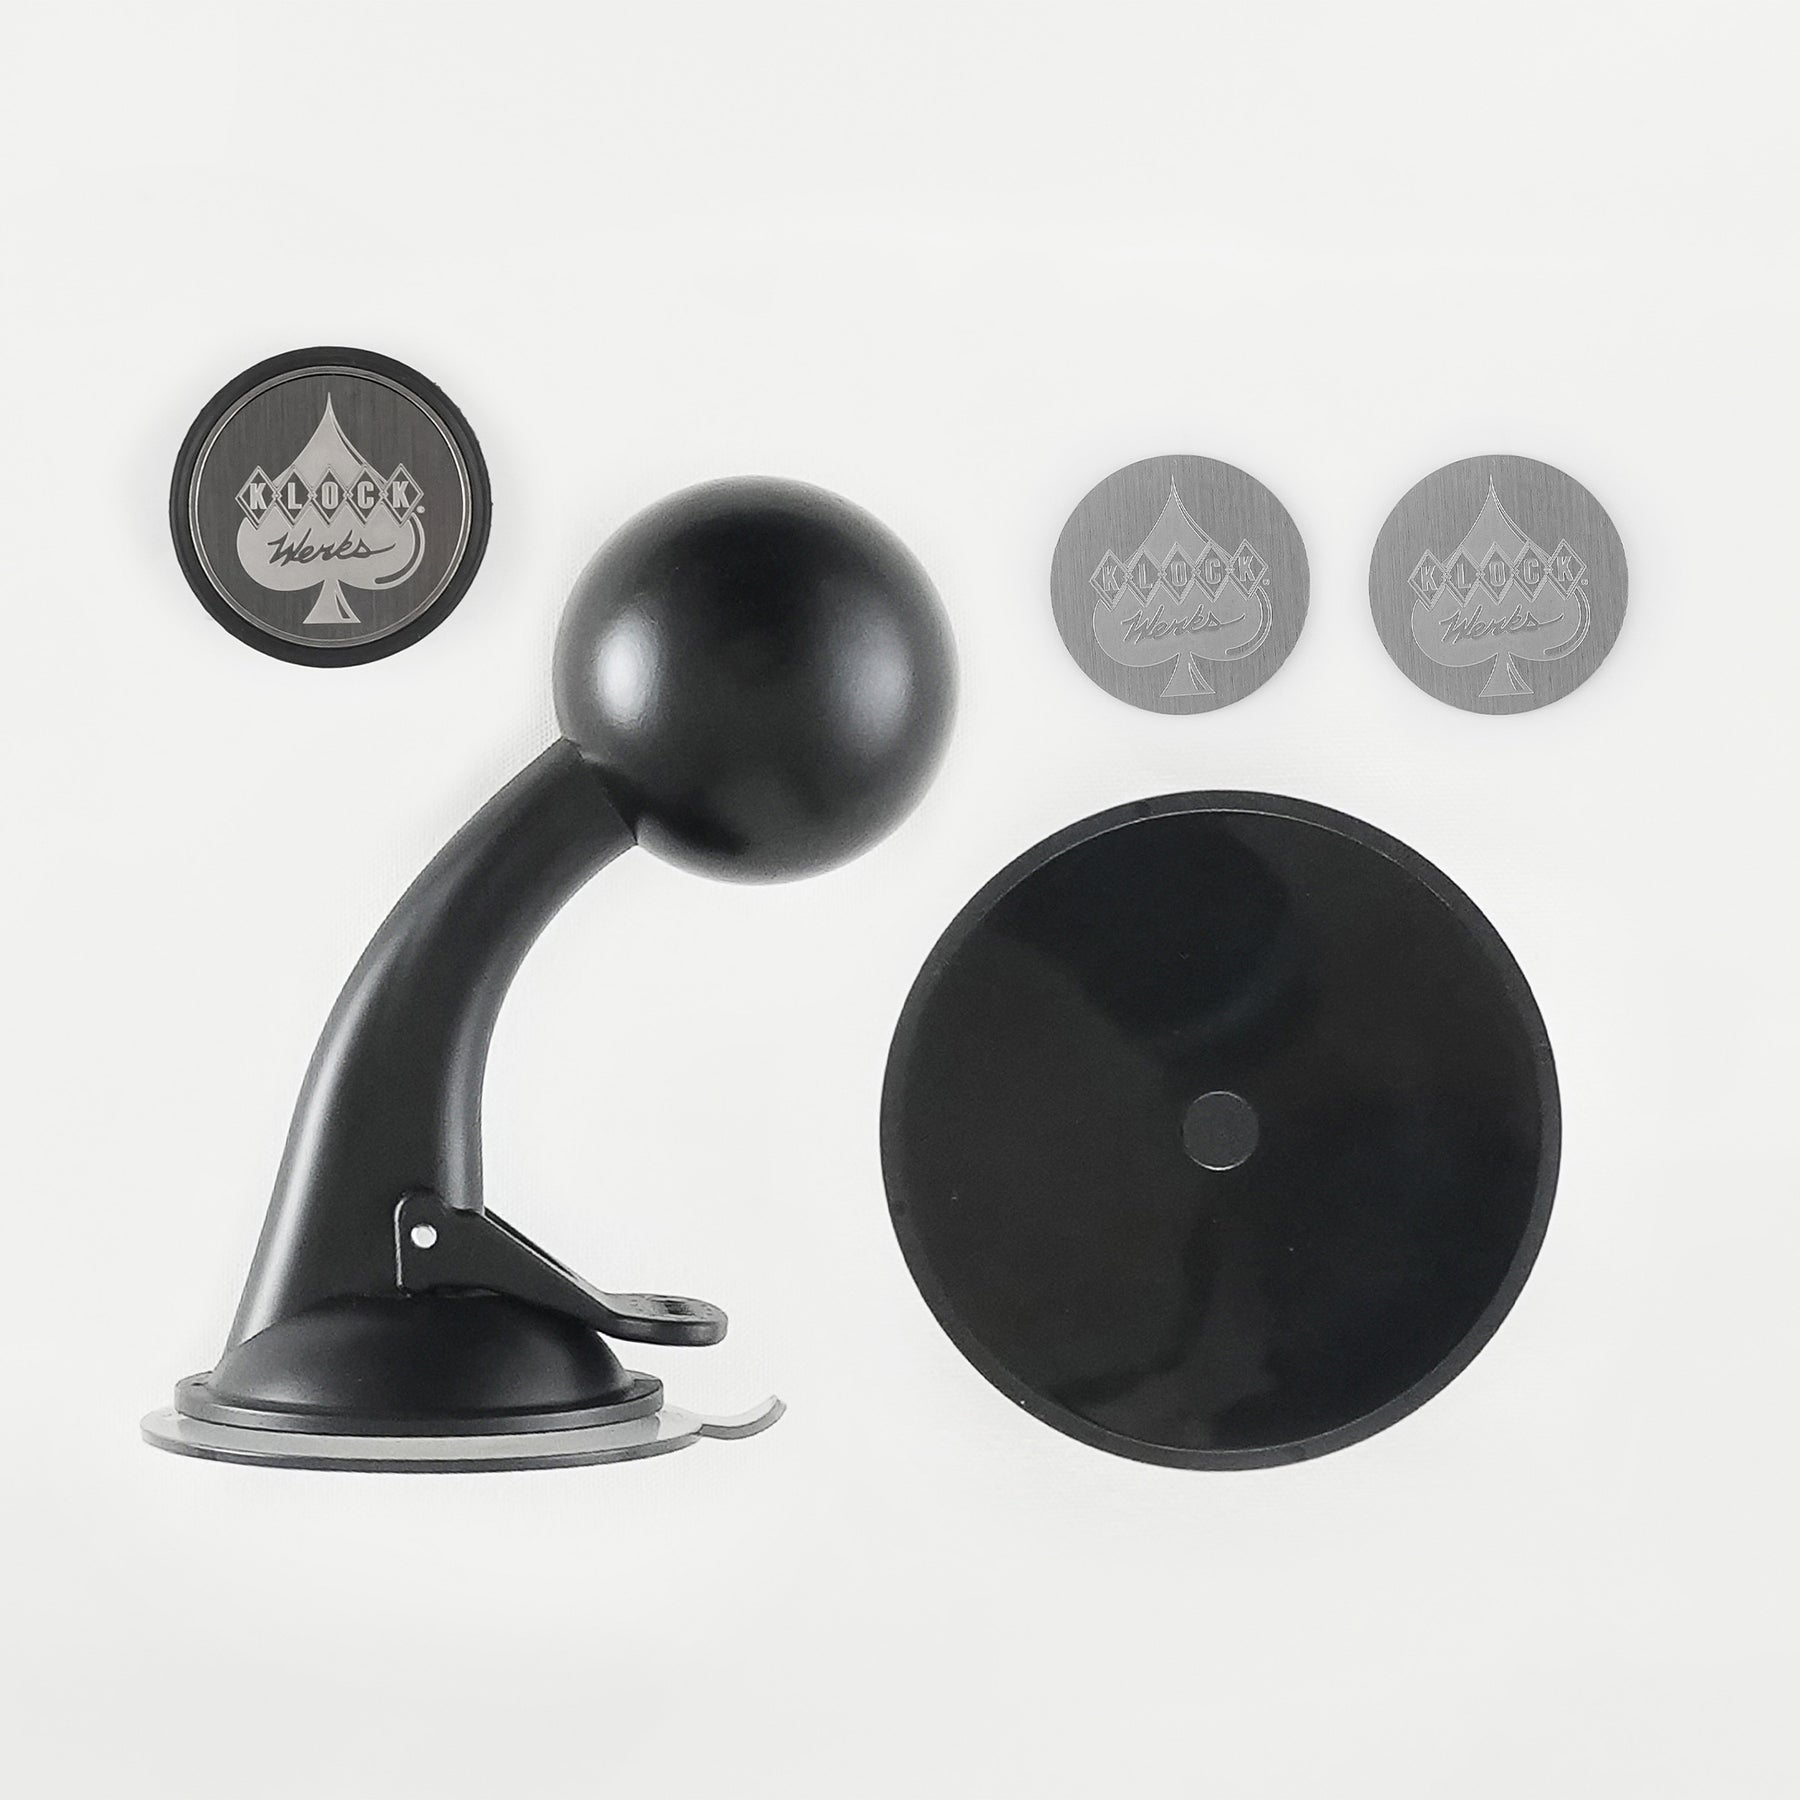 iOtraveler Suction Magnetic Phone Mount showing the complete kit